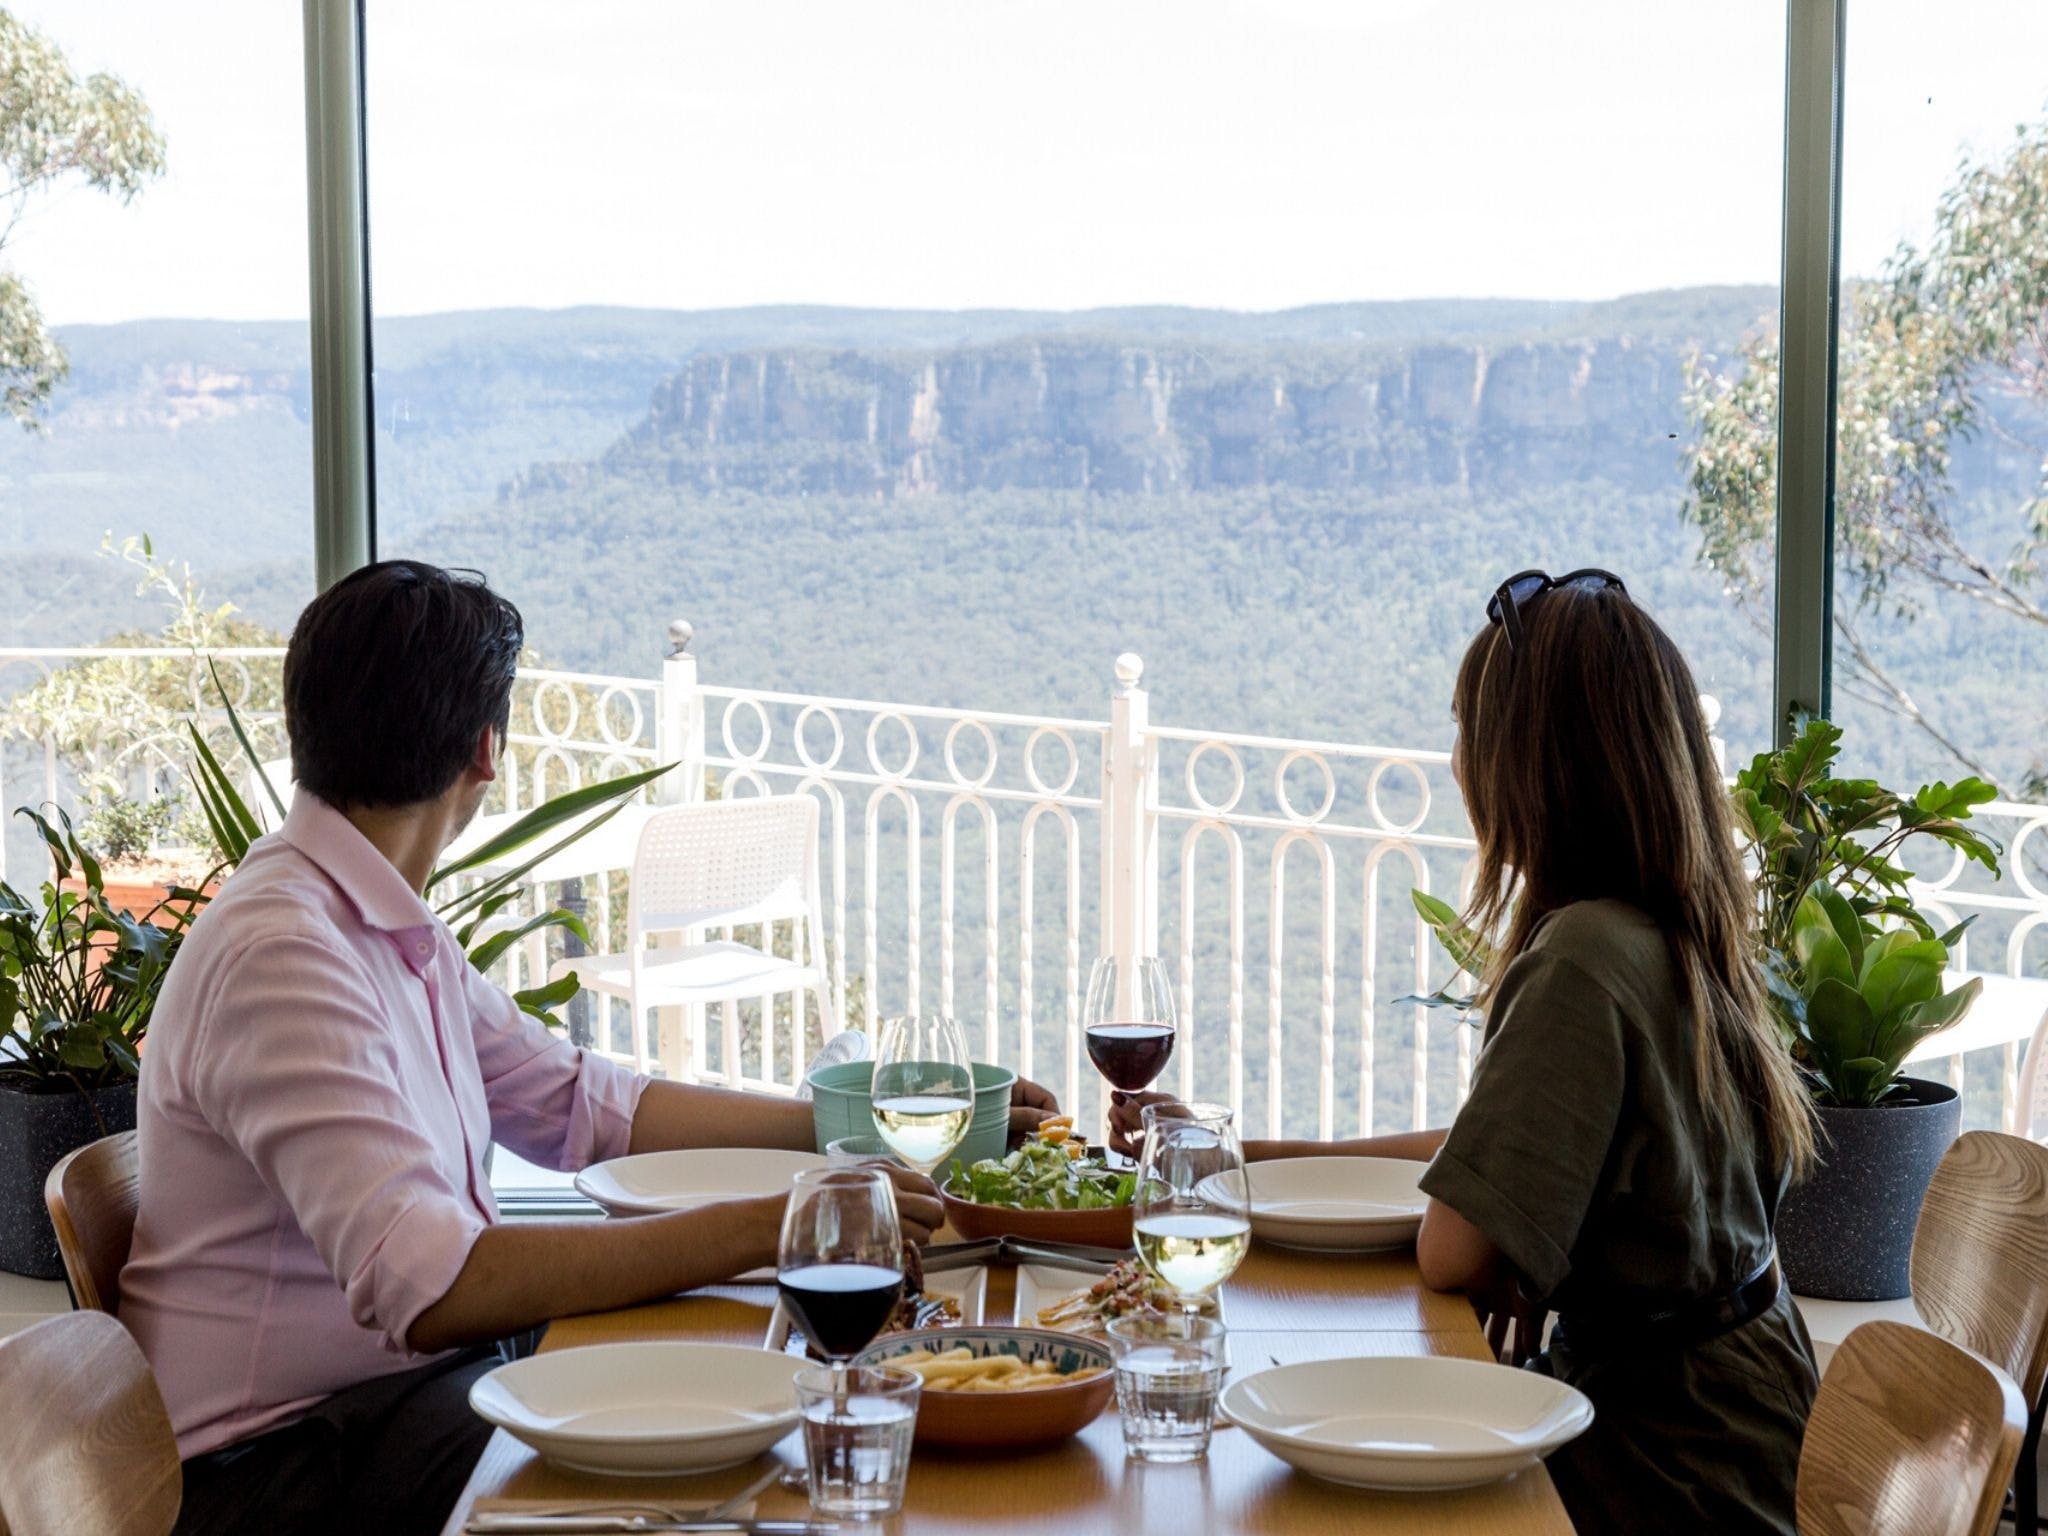 Christmas Day Lunch at The Lookout Echo Point - Tourism Canberra